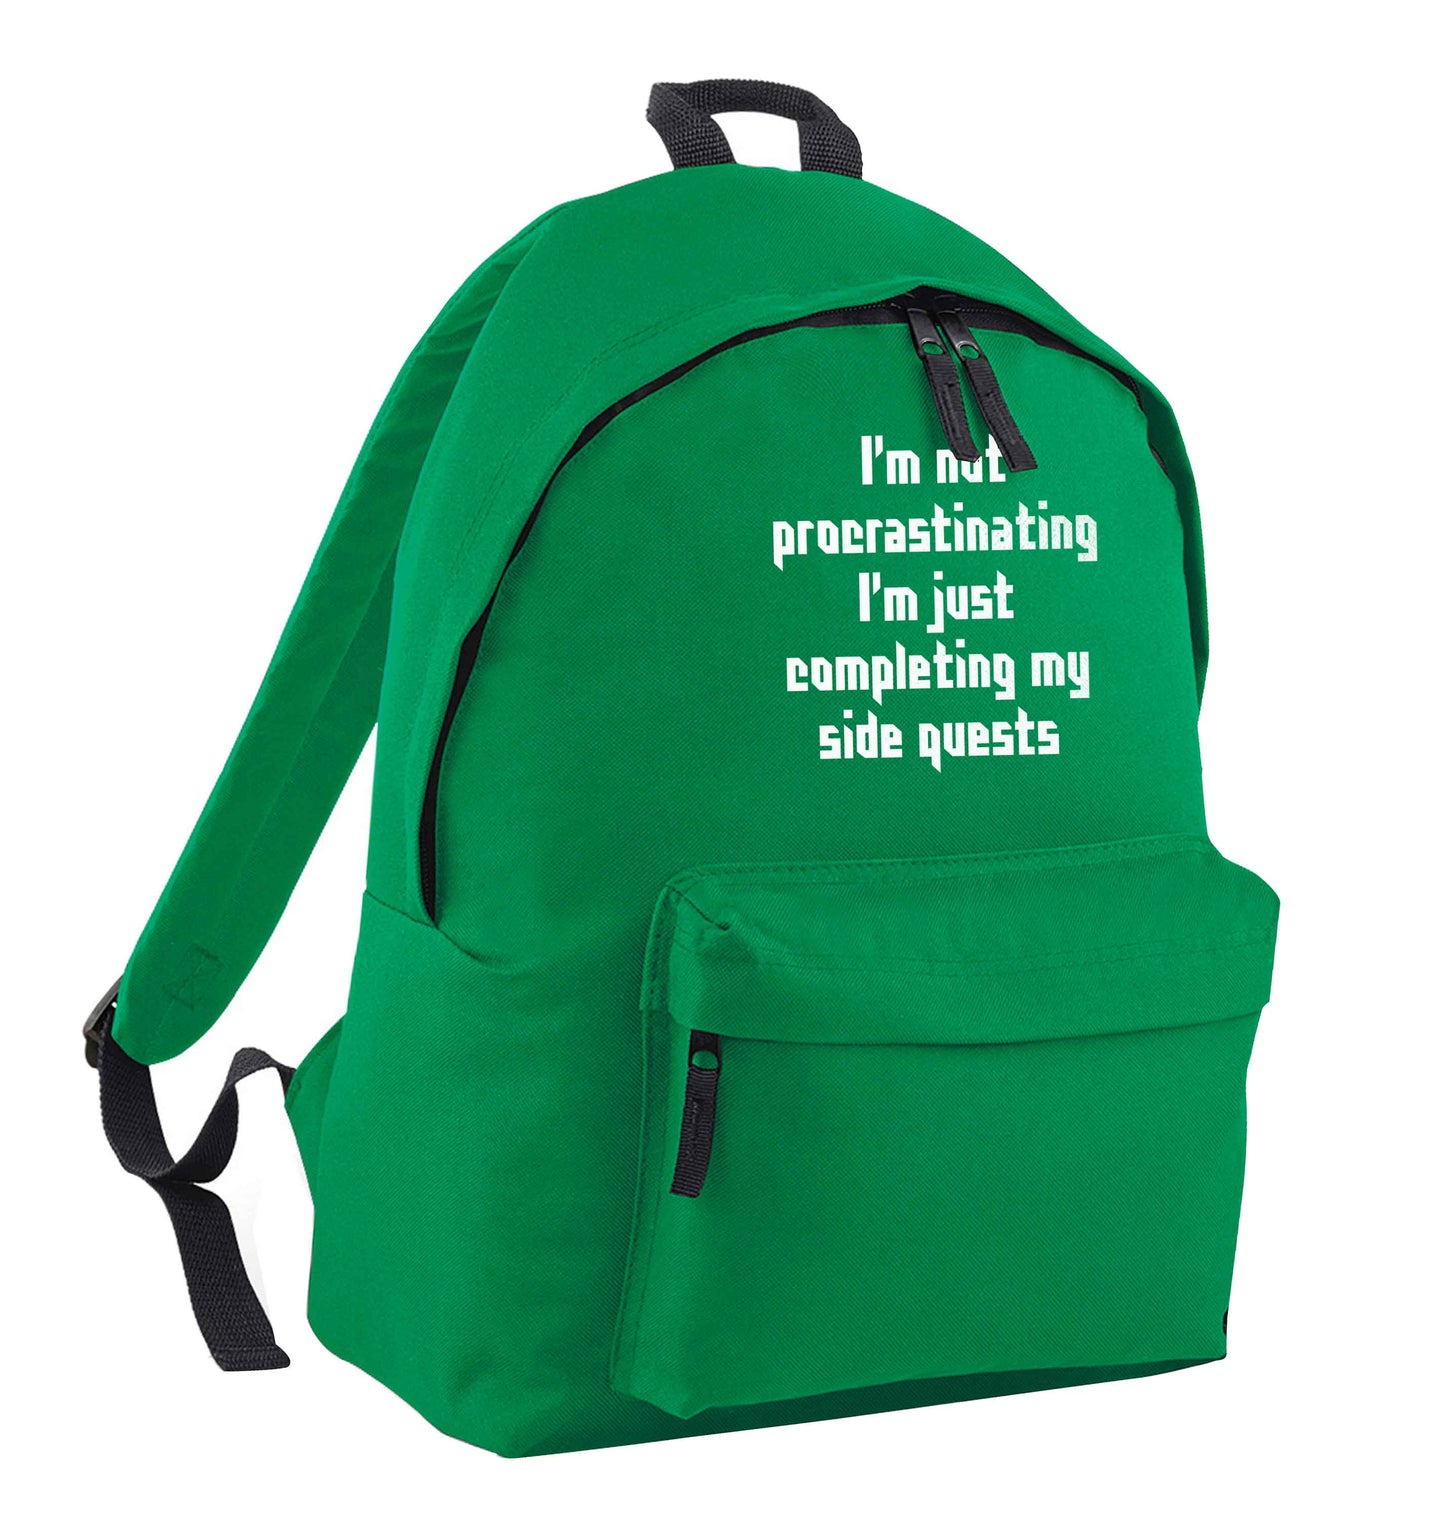 I'm not procrastinating I'm just completing my side quests green adults backpack